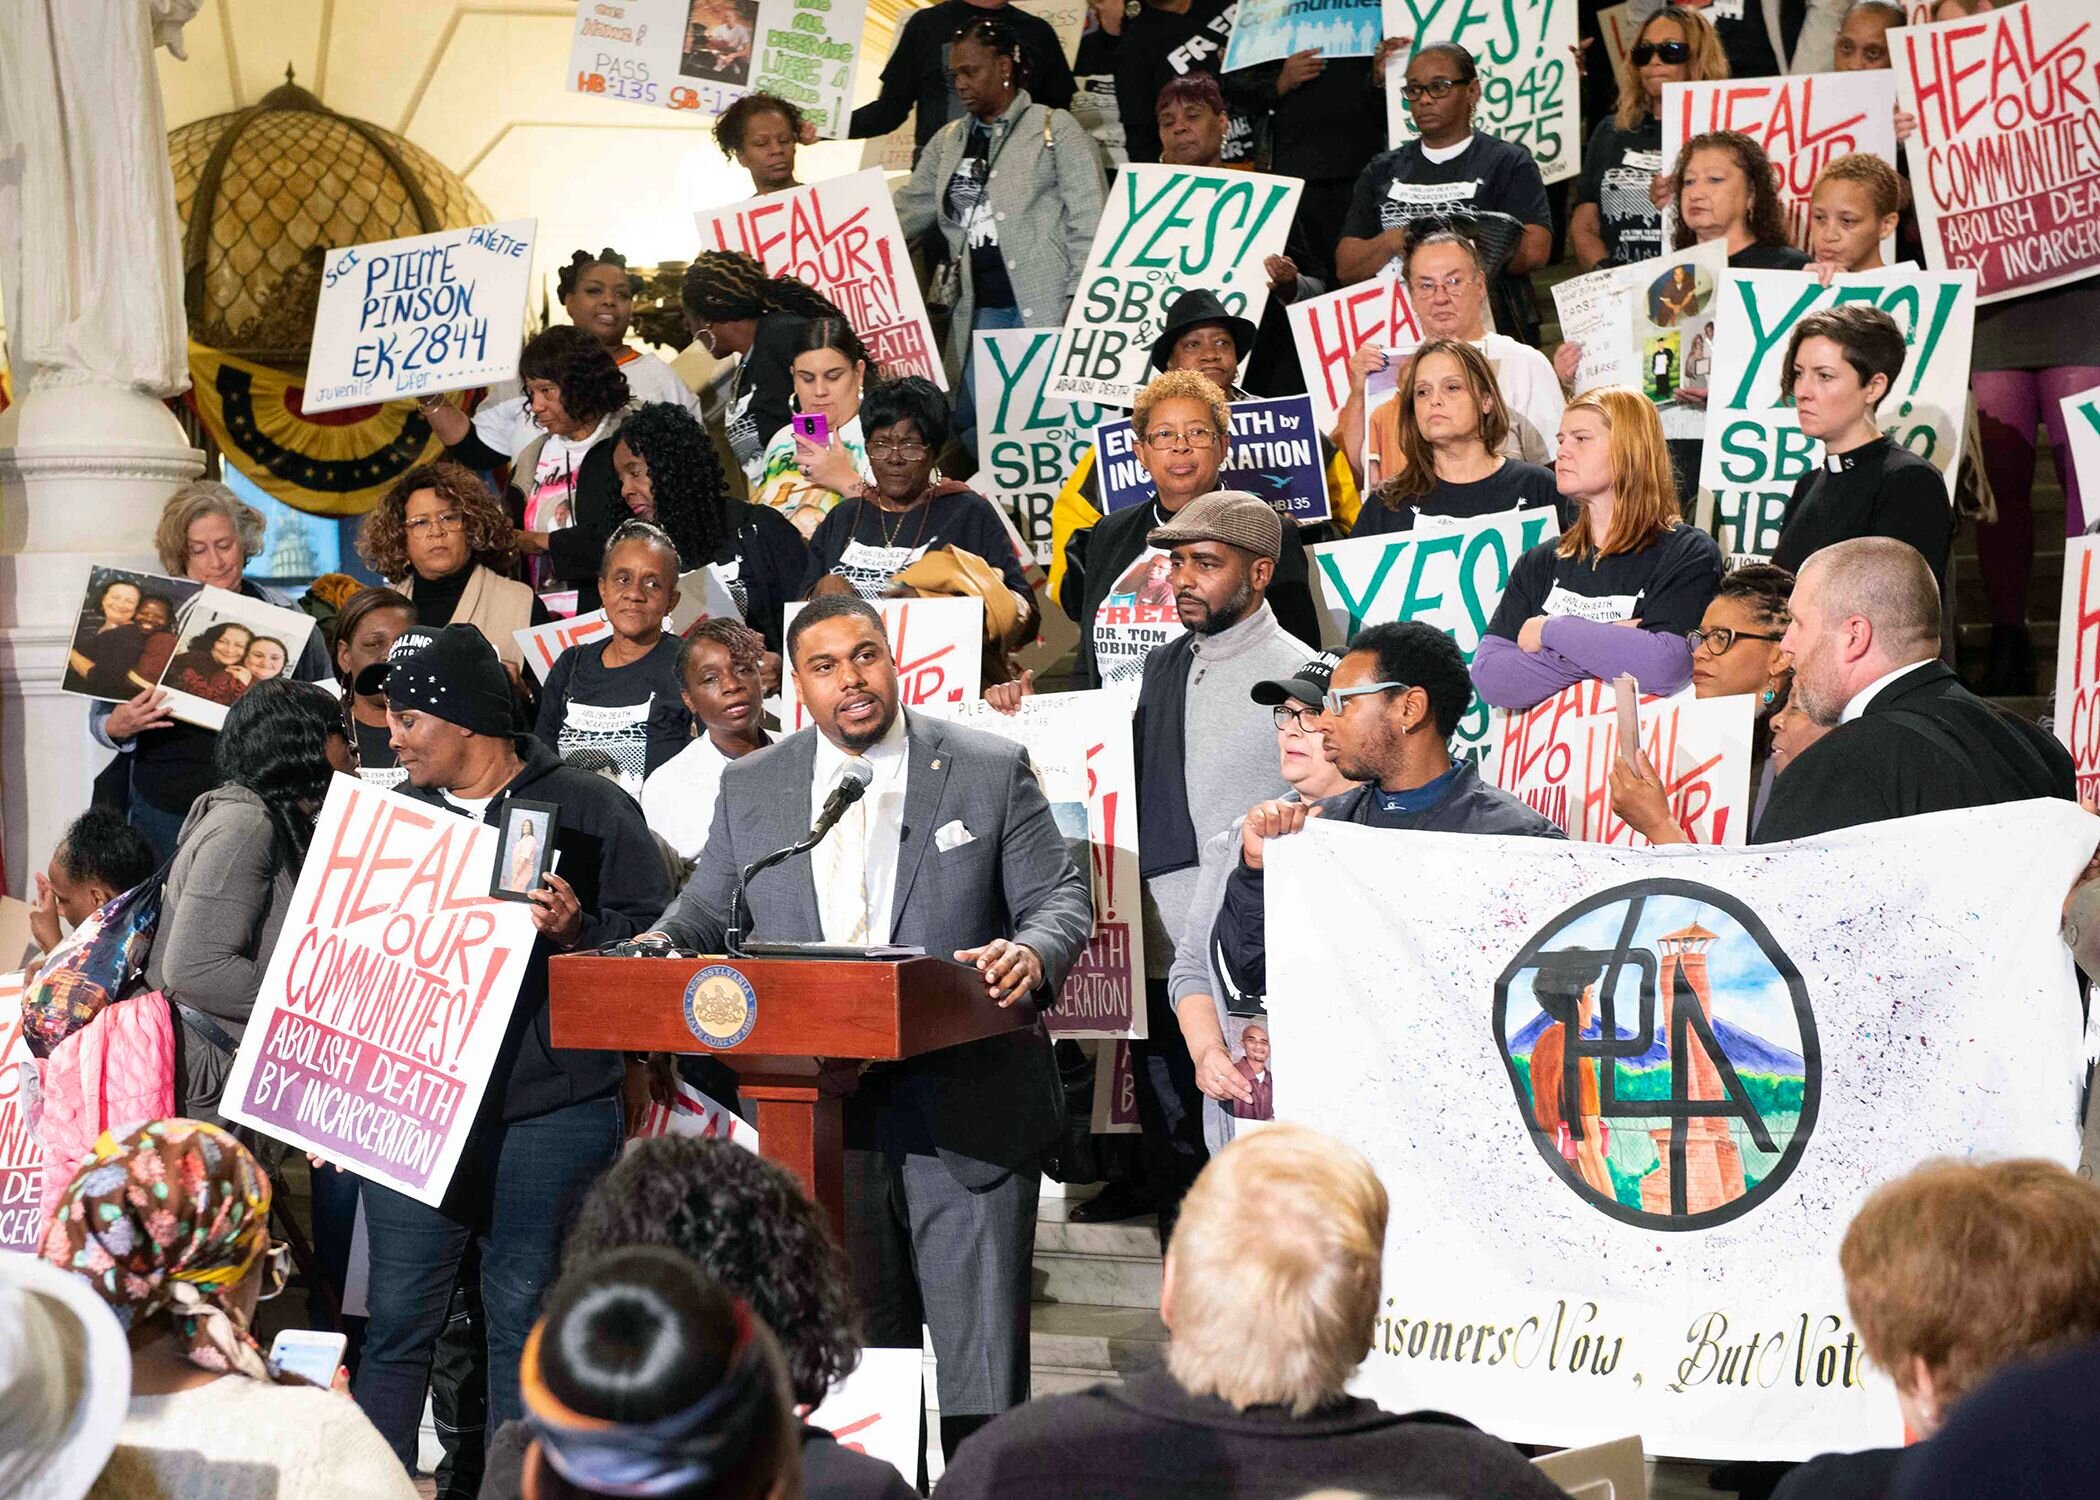 State Rep. Jason Dawkins at the Harrisburg Capitol with advocates against death by incarceration. Photo courtesy of PA House of Representatives.